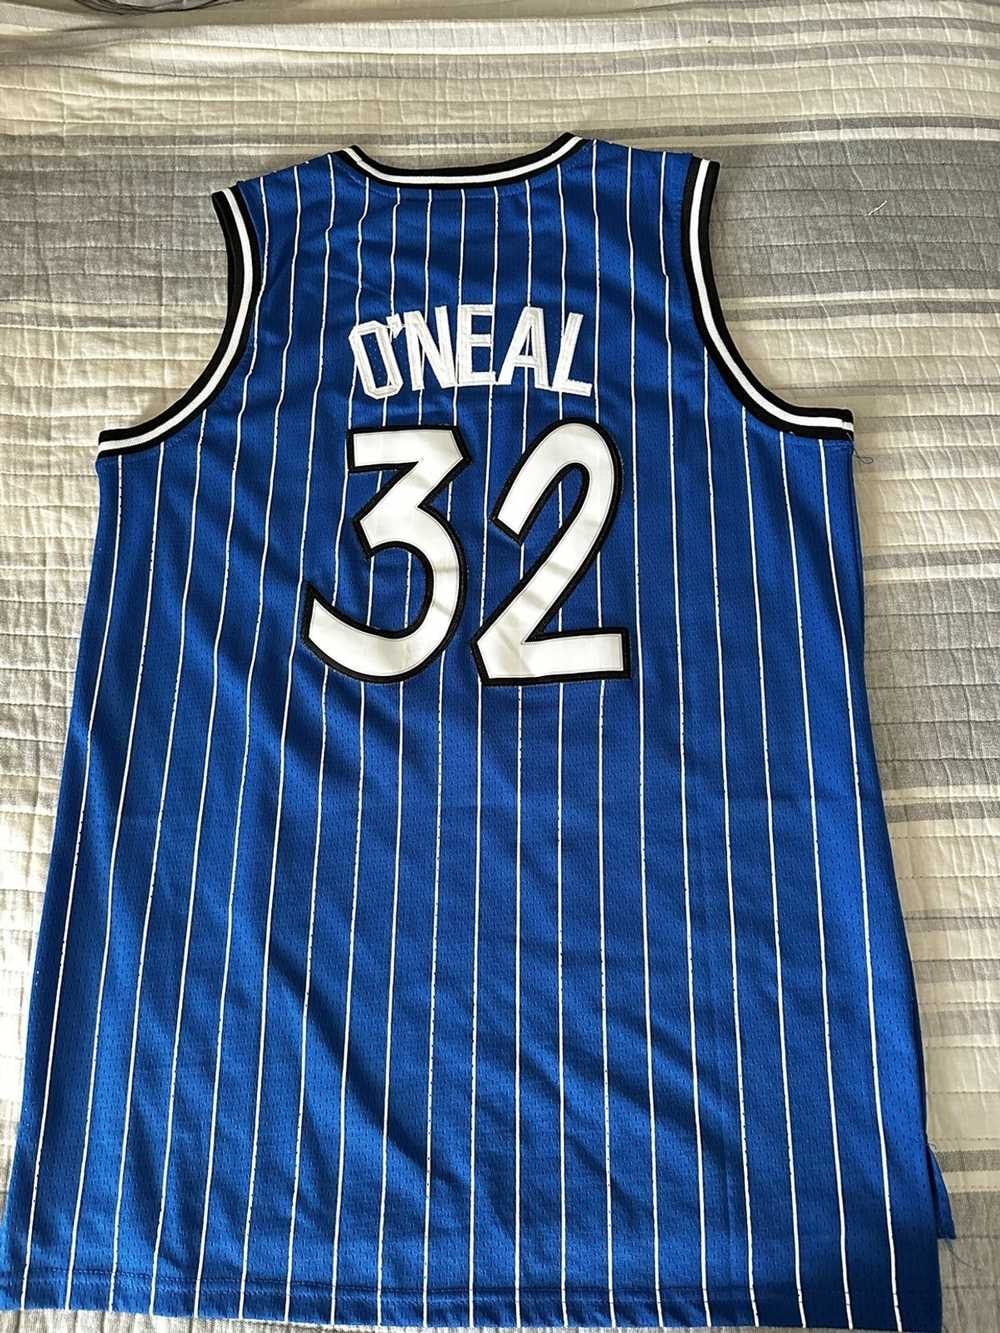 Mitchell & Ness Shaquille O'neal Magic Jersey - image 2